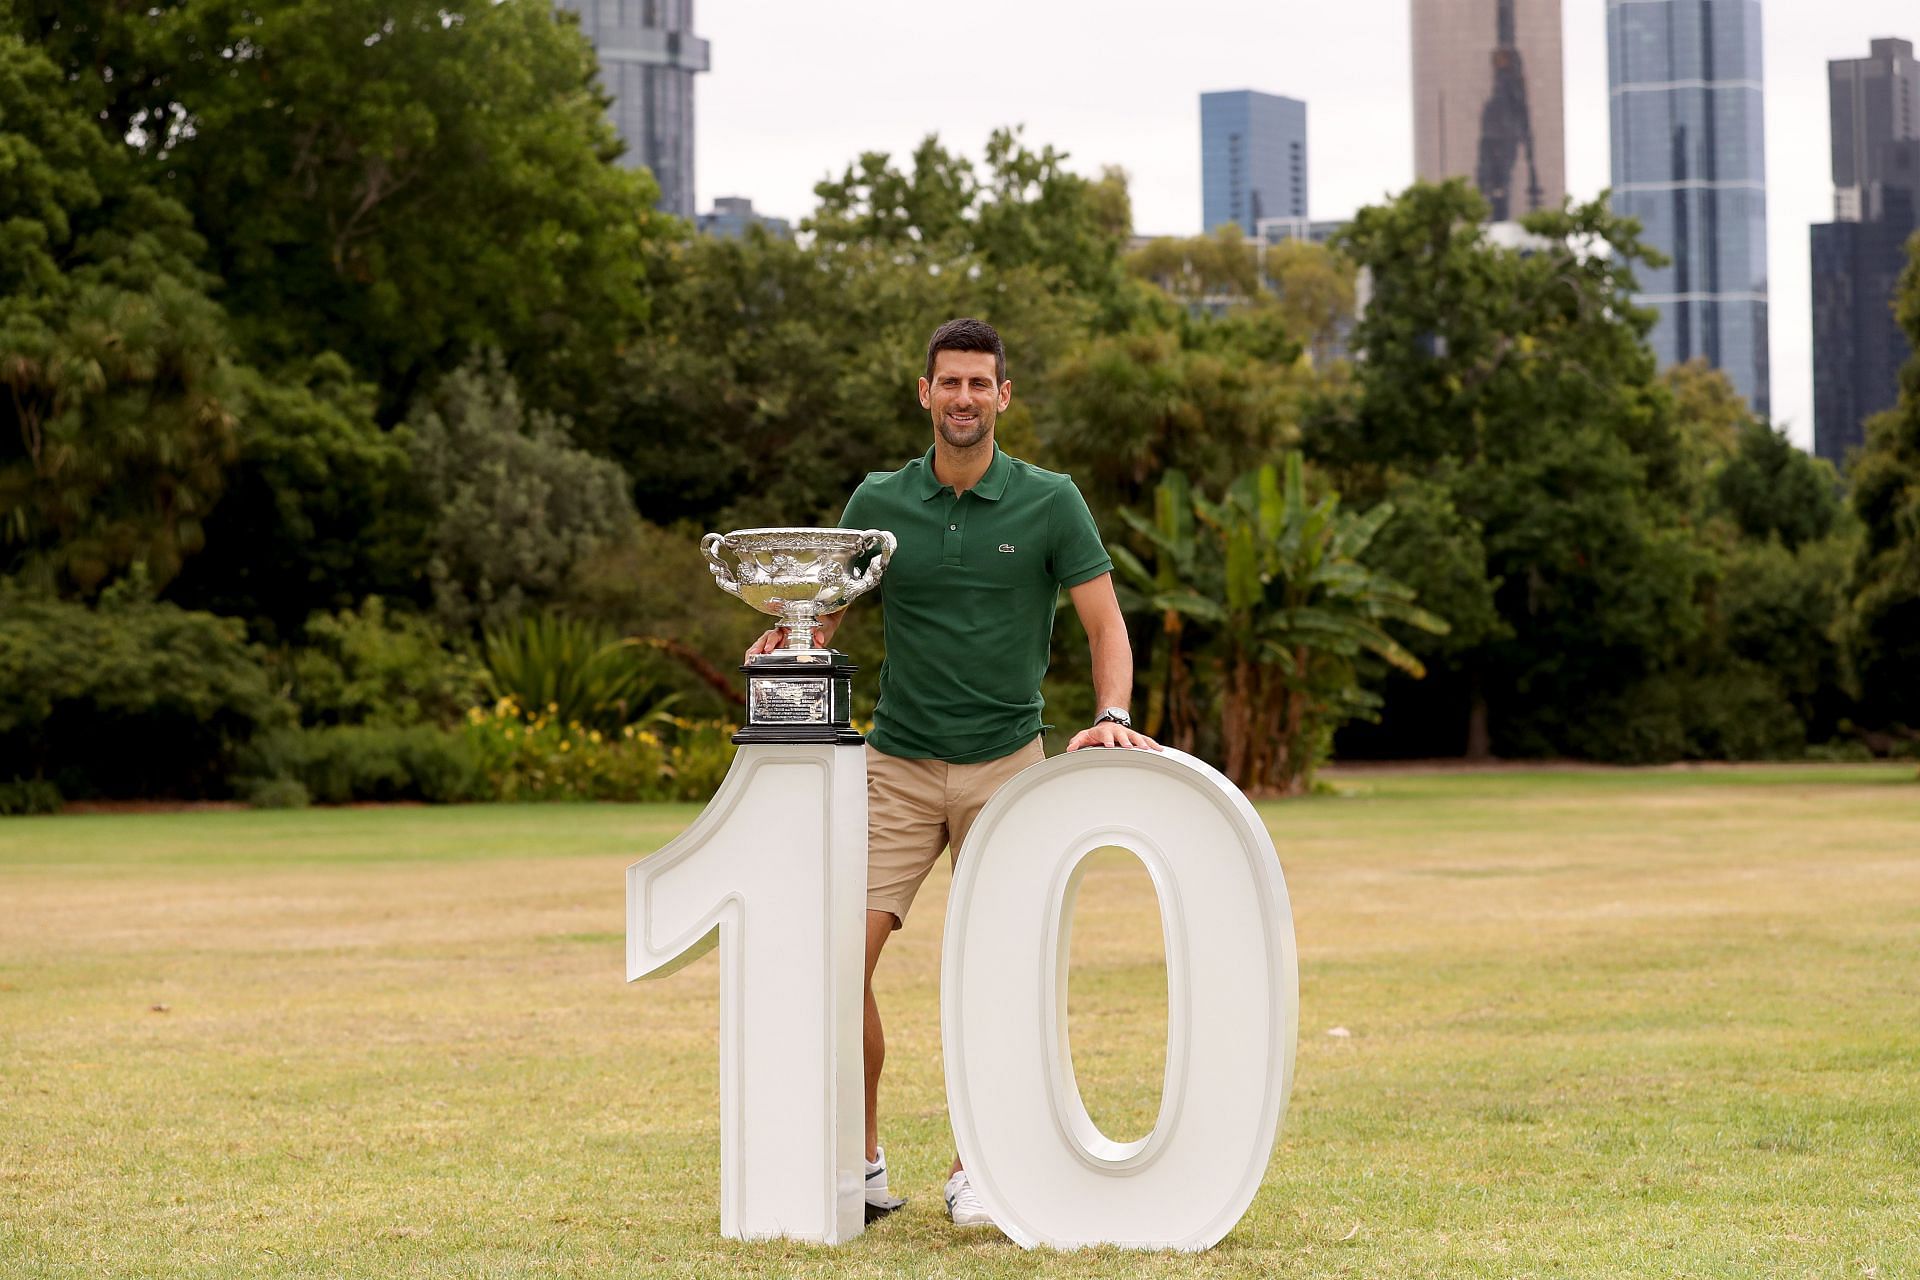 The 22-time Major winner after winning his tenth Australian Open title last month